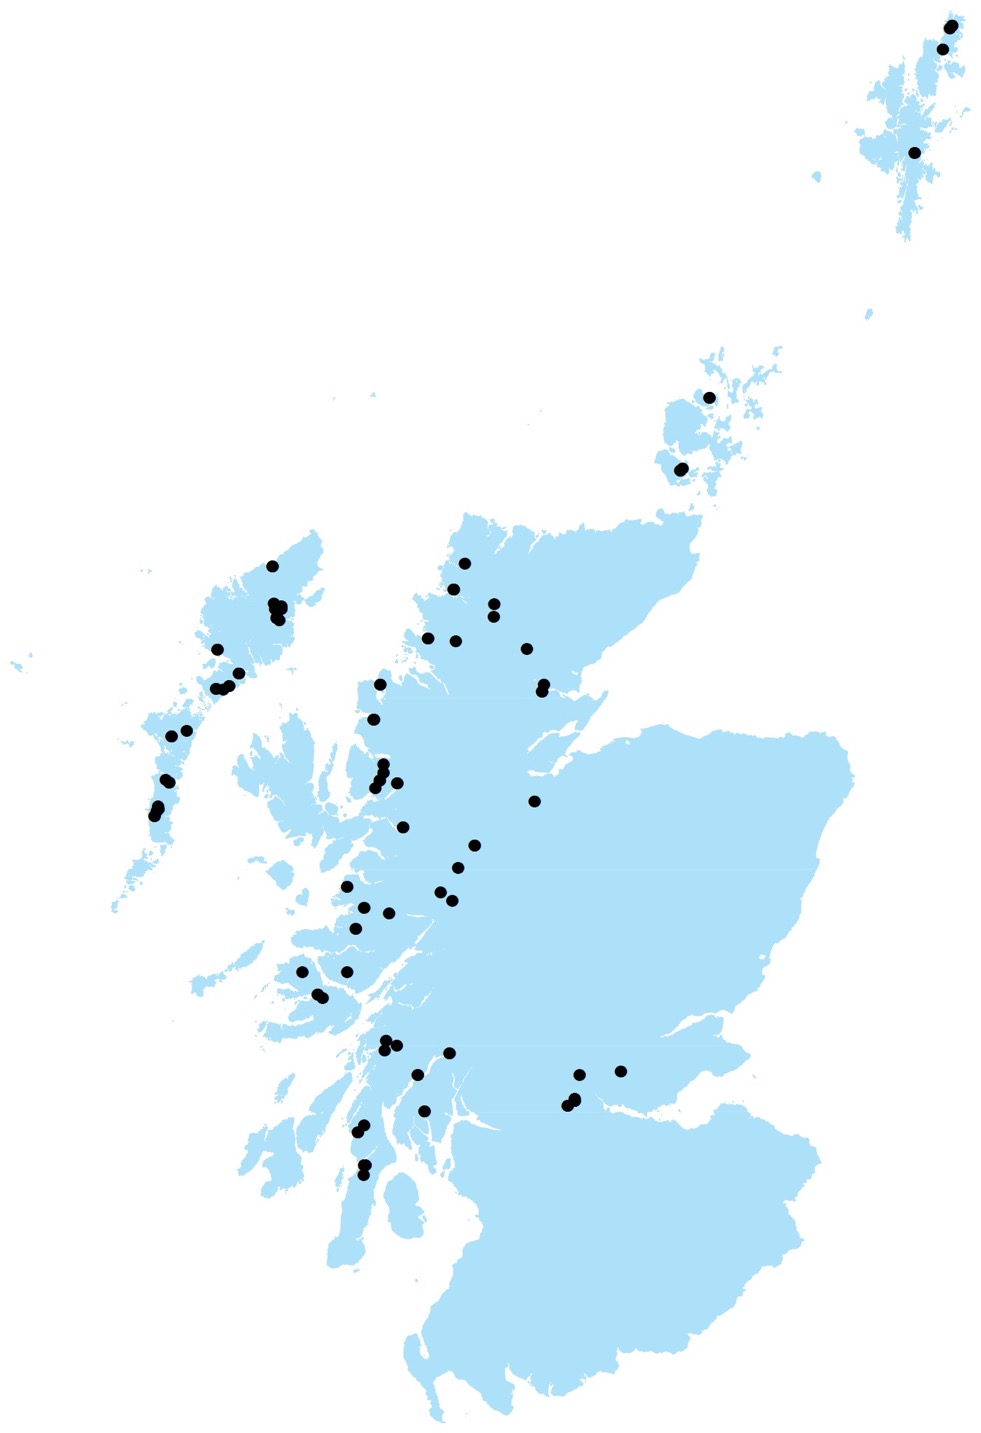 Figure 2: The distribution of active Atlantic salmon smolt sites in 2017